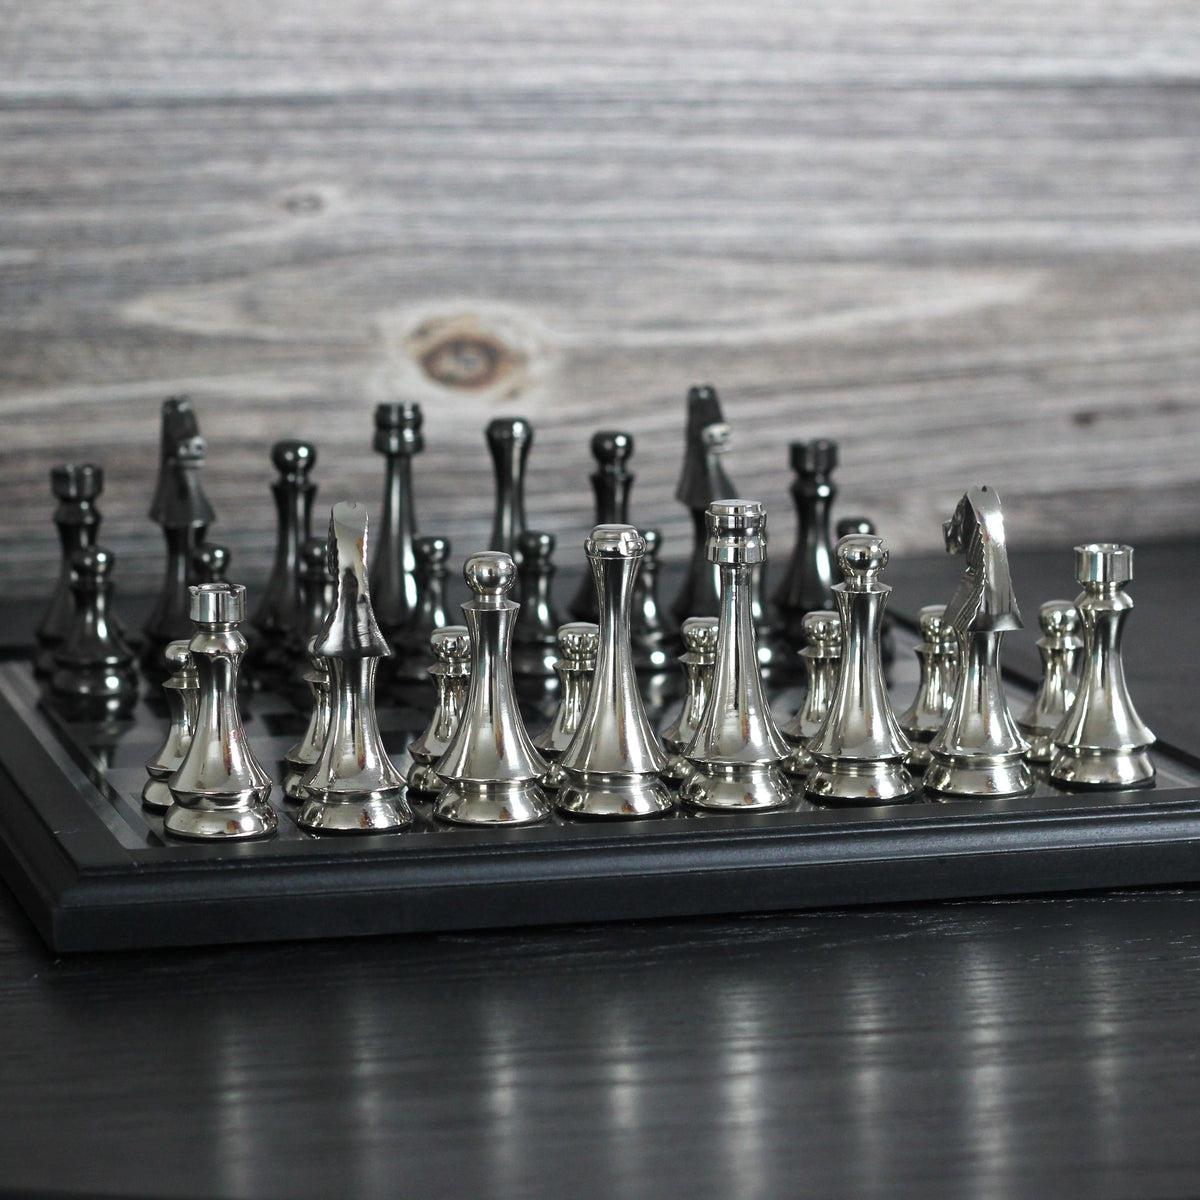 Scotch Gambit - Gorgeous Black and Silver Metallic Chess Set - Marble Cultures